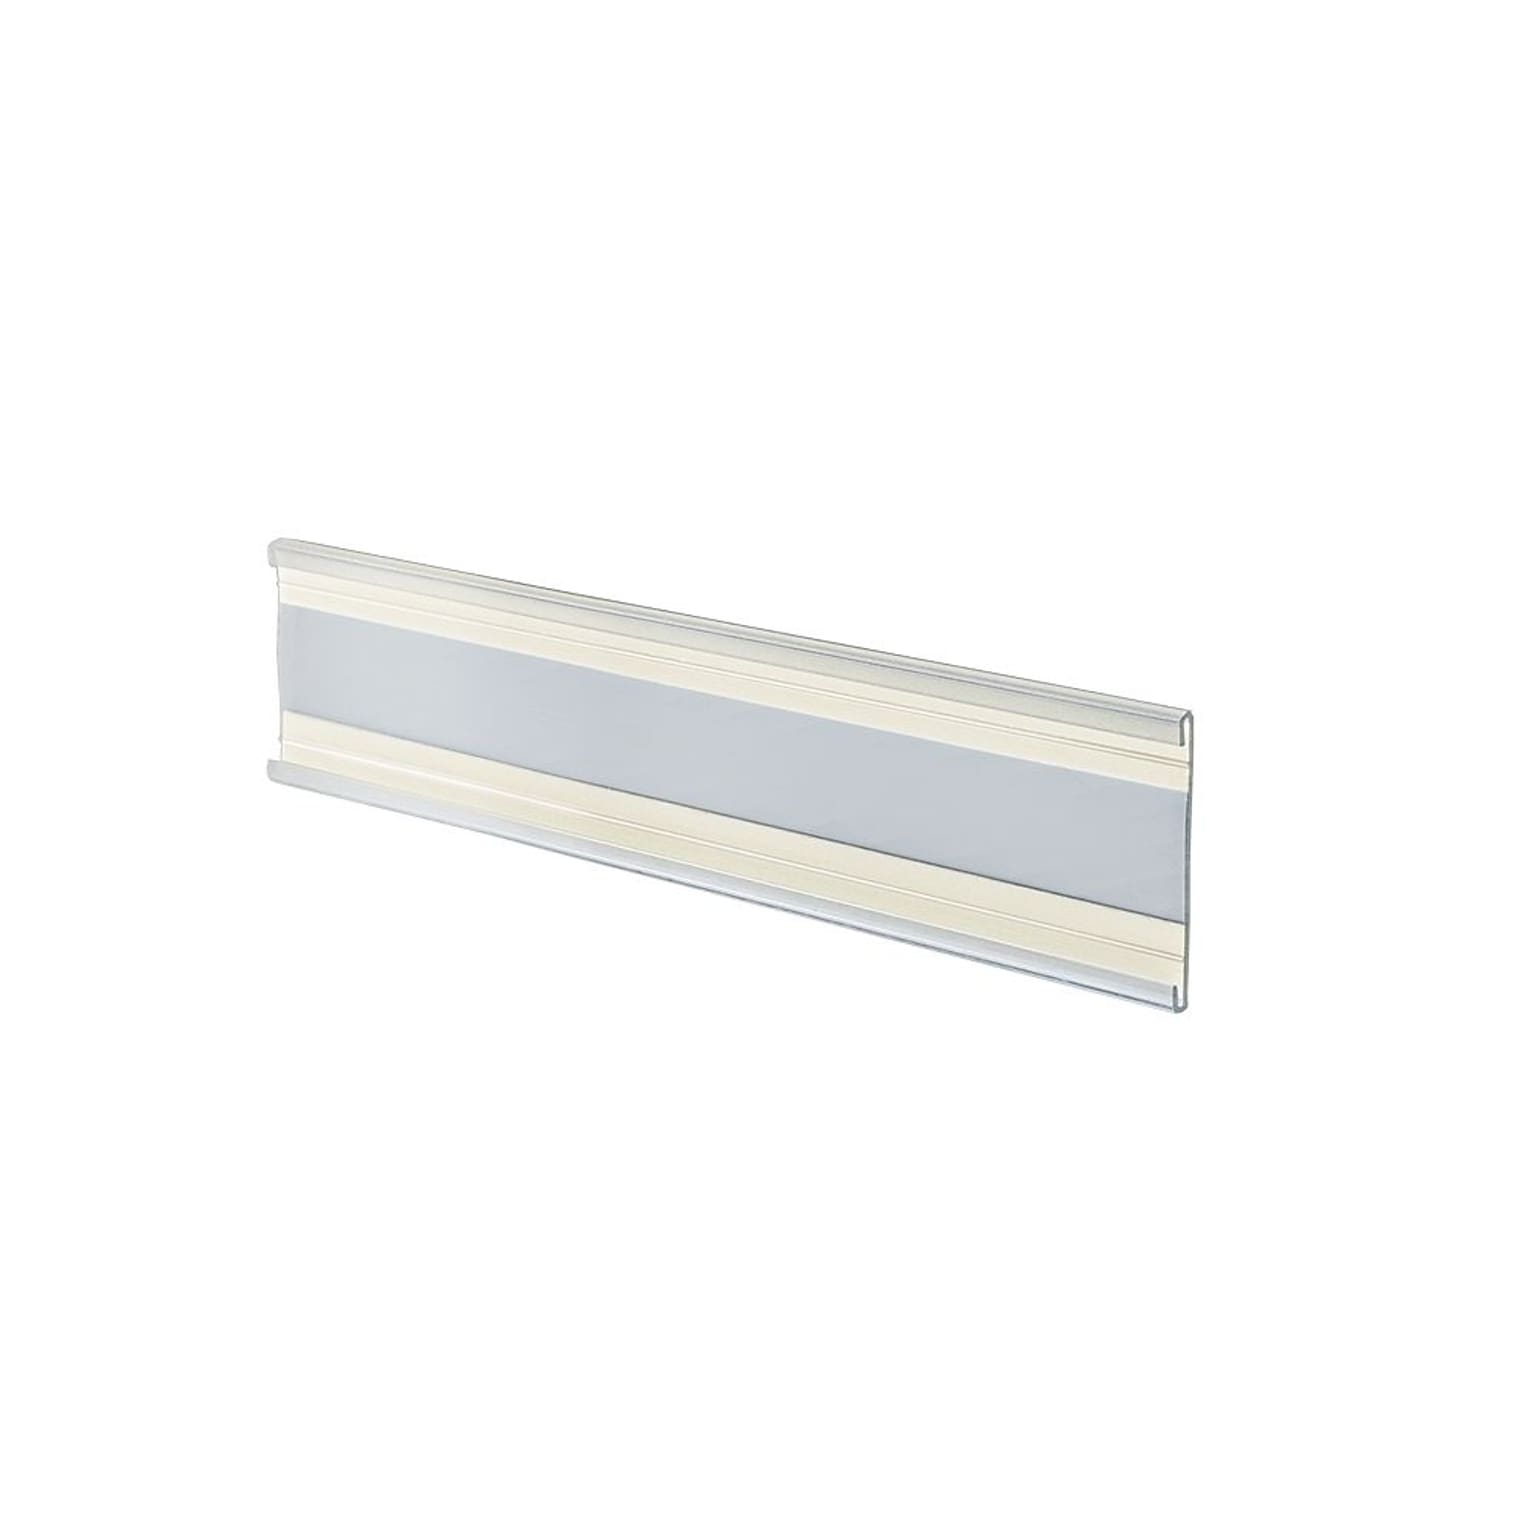 Azar® 2 x 6 Plastic Adhesive-Back C-Channel Nameplates, Clear, 10/Pack